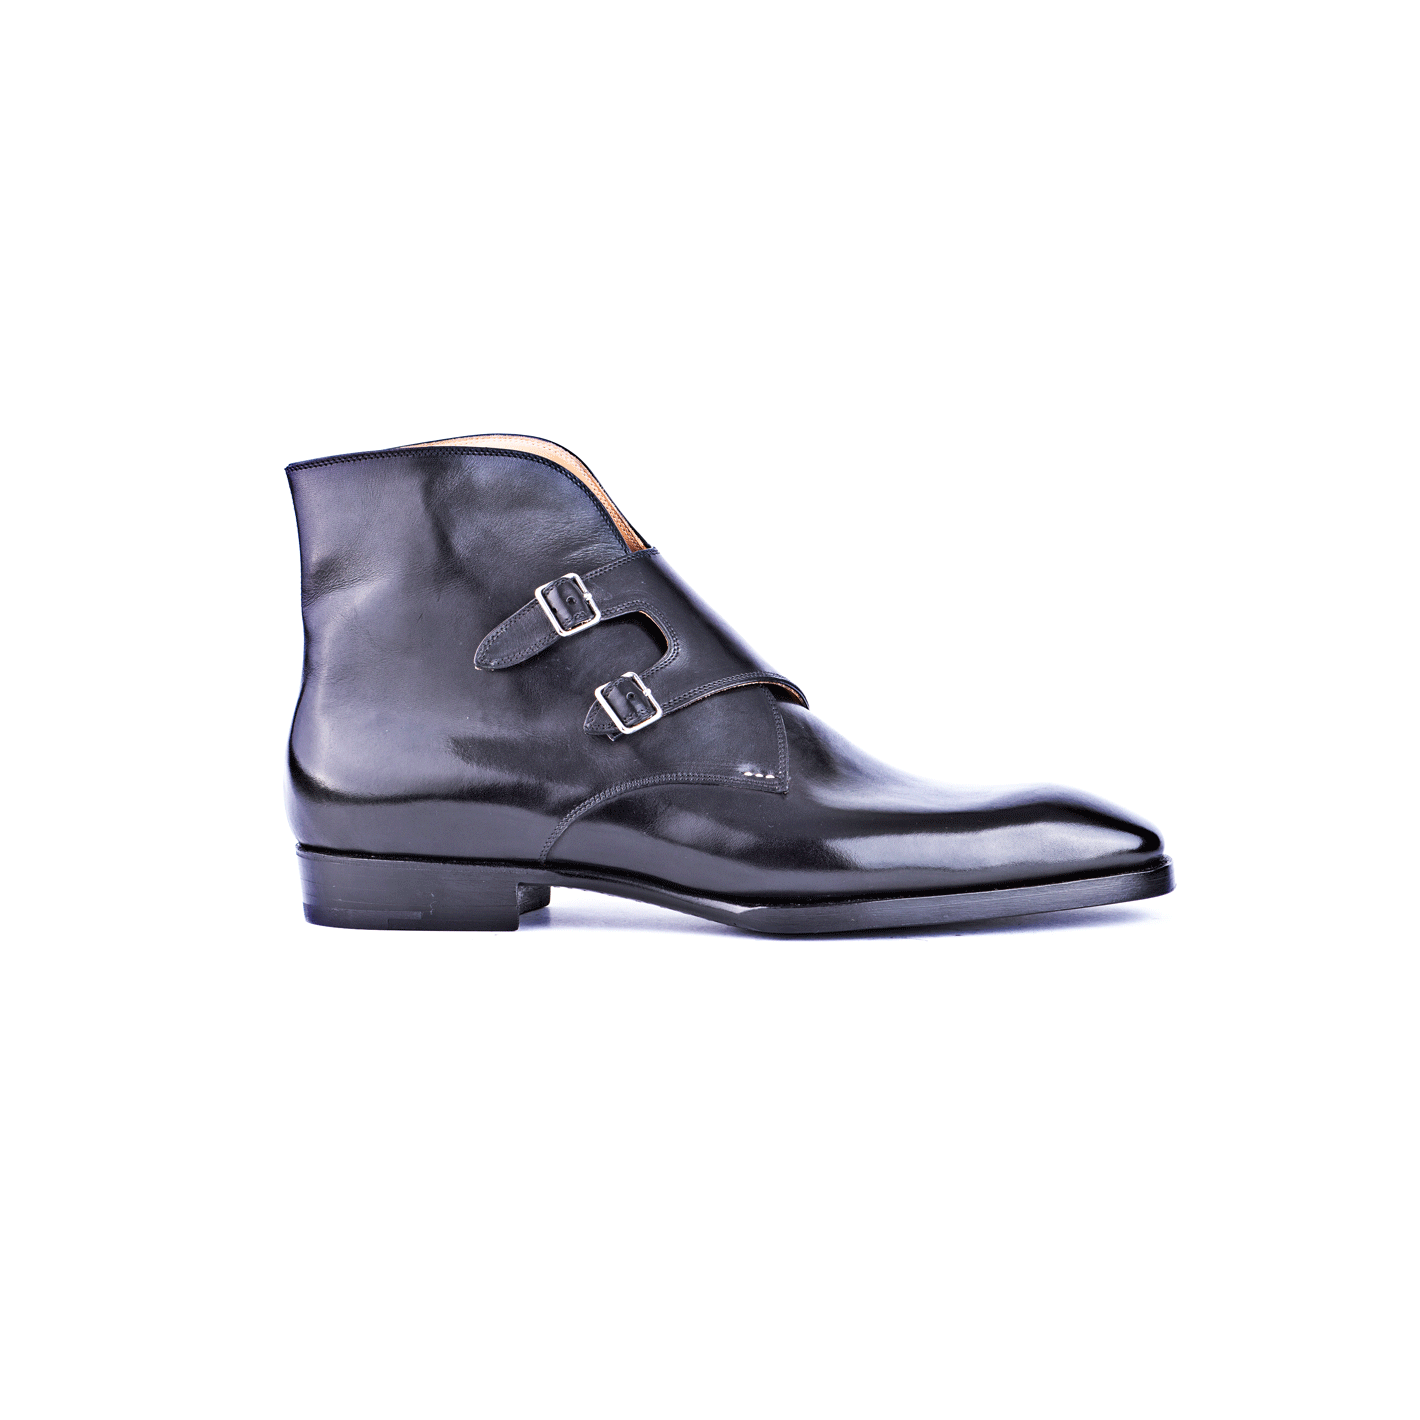 Double buckle high cut boot monk